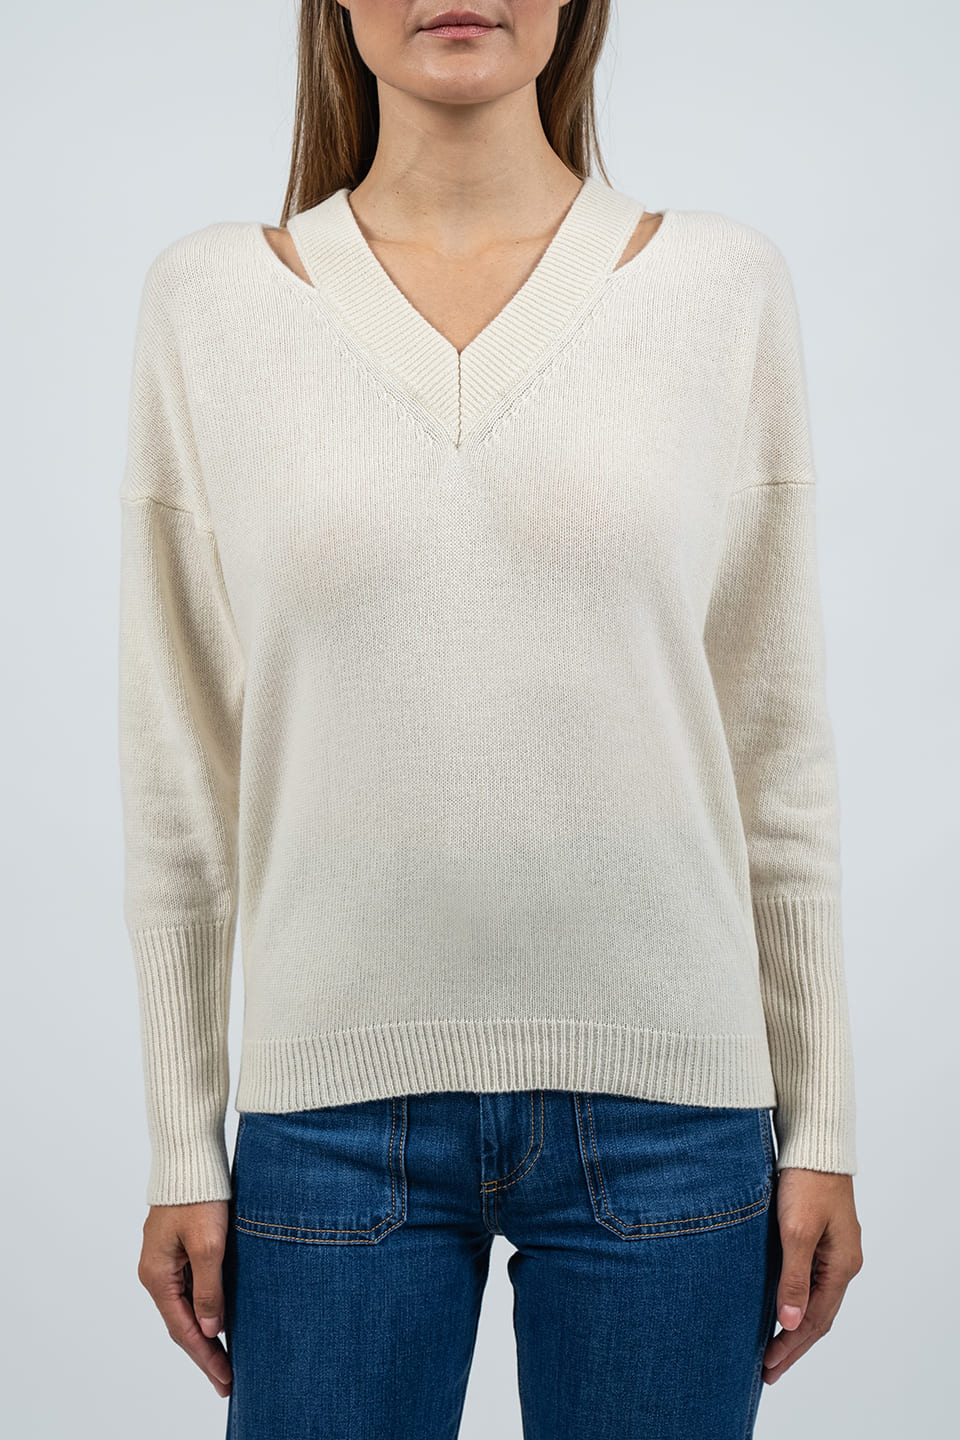 Shop online trendy Beige Women long sleeve from Federica Tosi Fashion designer. Product gallery 1